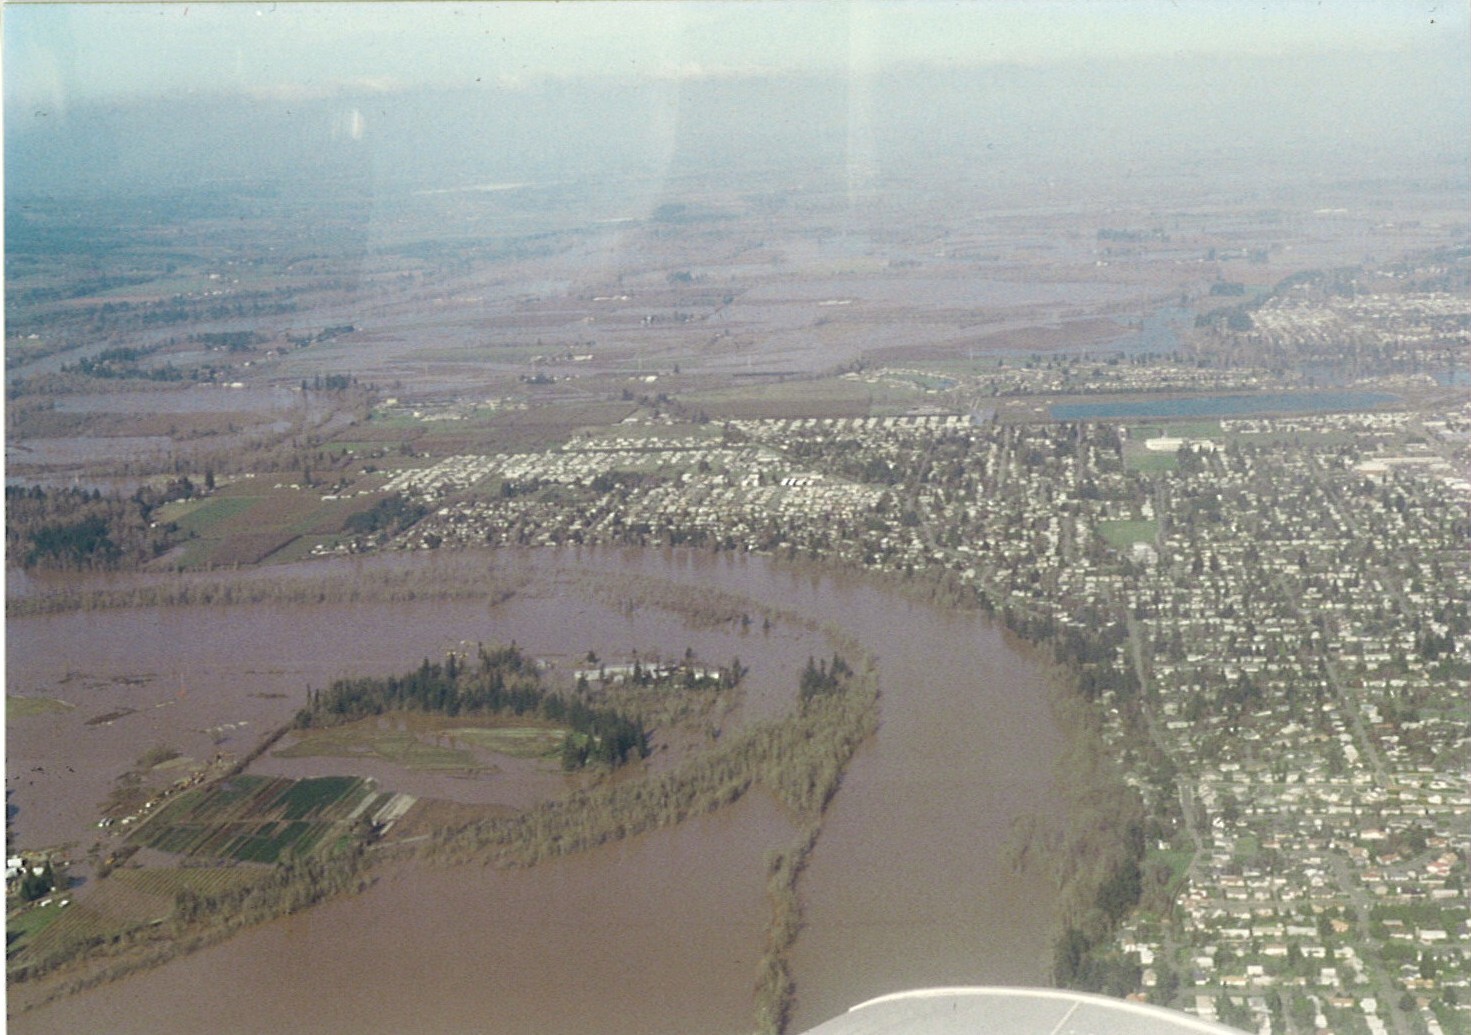 City of Keizer area that flooded during '96 to '97